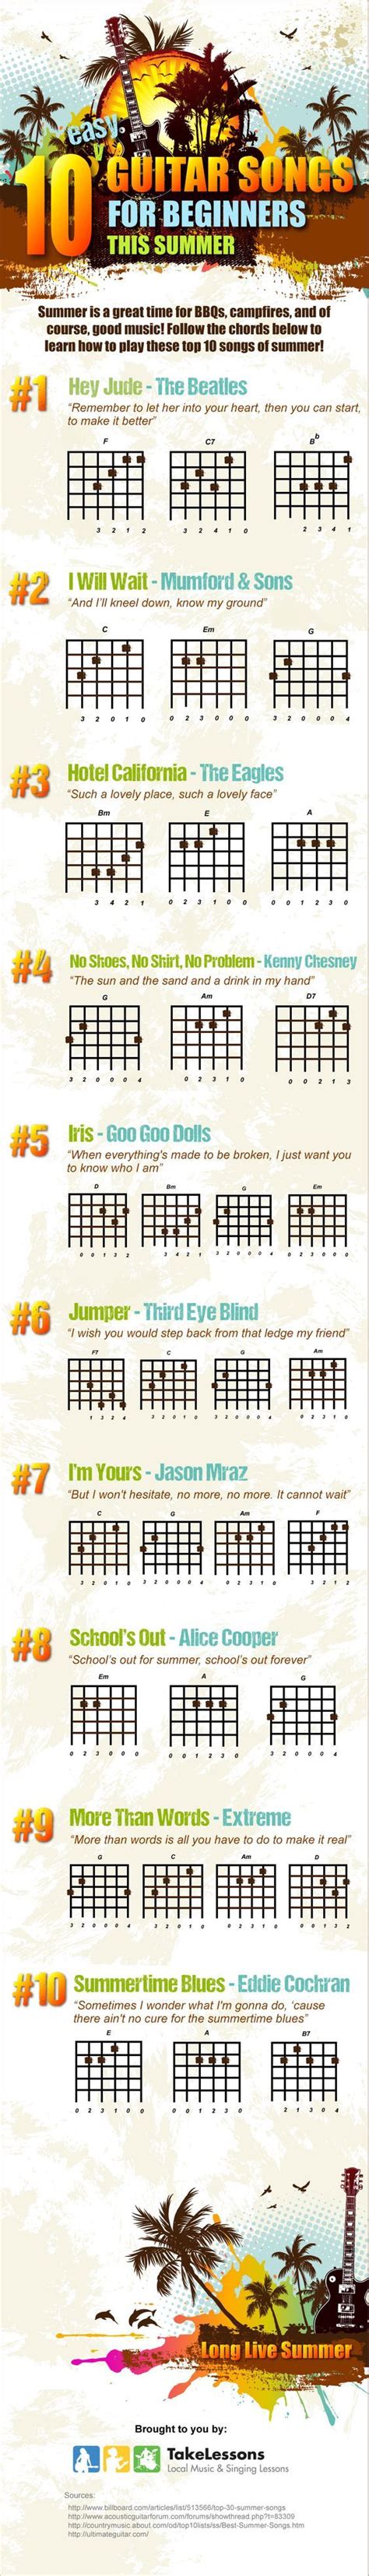 List of easy guitar songs with just 4 chords. 20 best GUITAR CHORDS images on Pinterest | Easy guitar chords, Guitar lessons and Sheet music